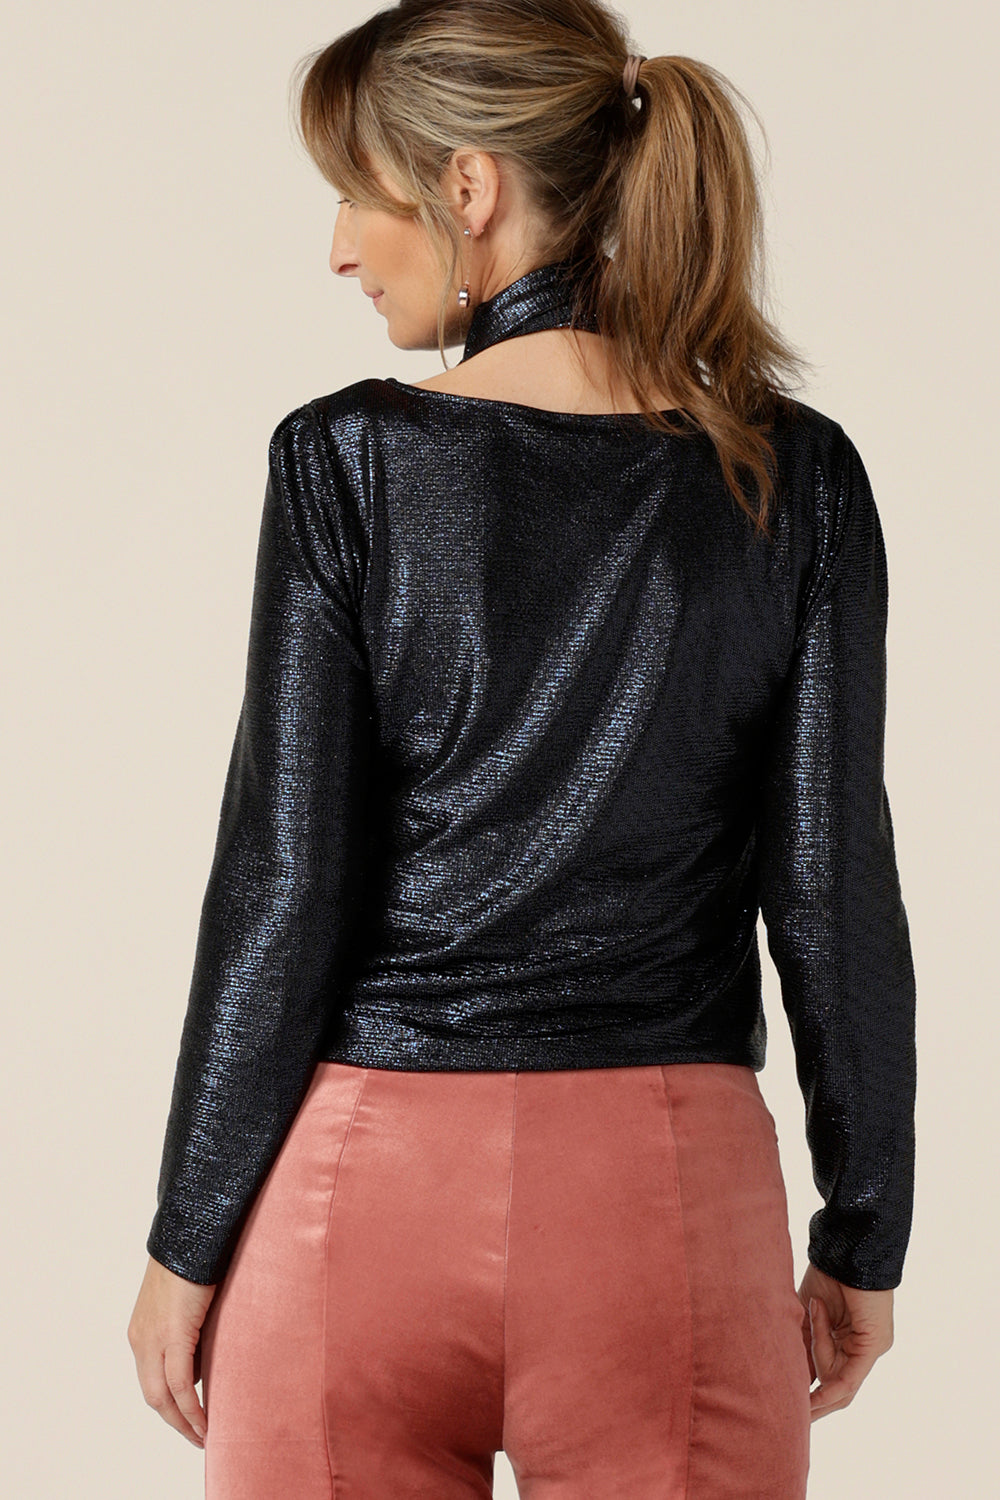 Back view of a shimmering jersey neck tie in midnight blue wrapped above a long sleeve, sparkly jersey top for an evening look with a difference. Made in Australia by women's clothing and occasionwear brand, L&F.